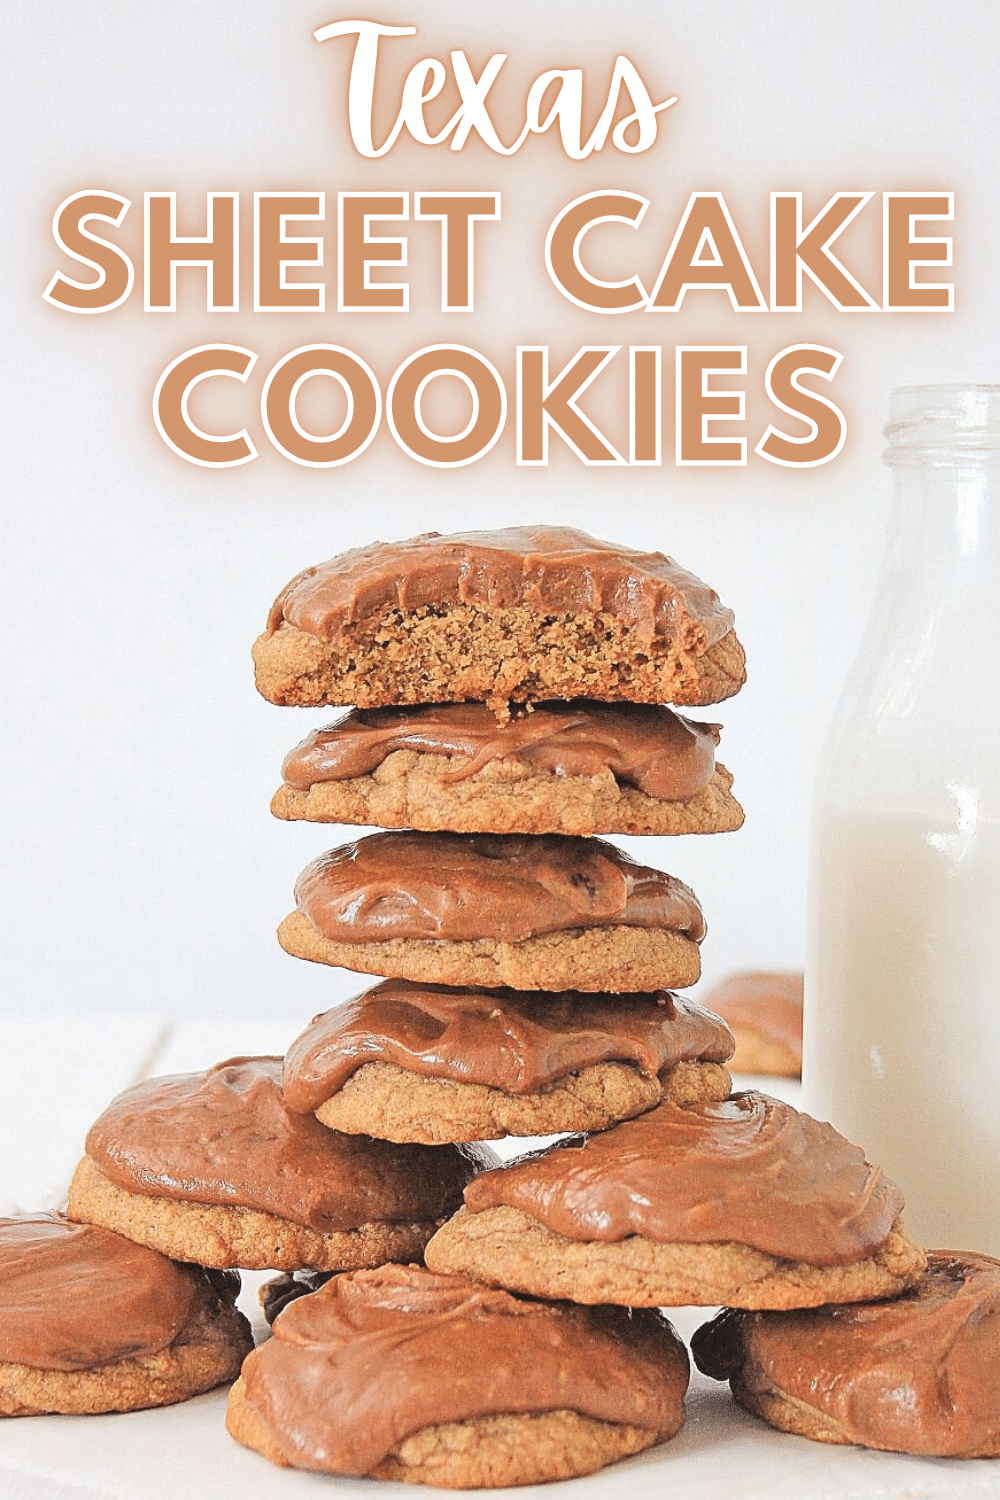 An image of stacked Texas Sheet Cookies, with the top cookie cut into half highlighting the cross section of the cookie with a text at the top saying "Texas Sheet Cake Cookies".